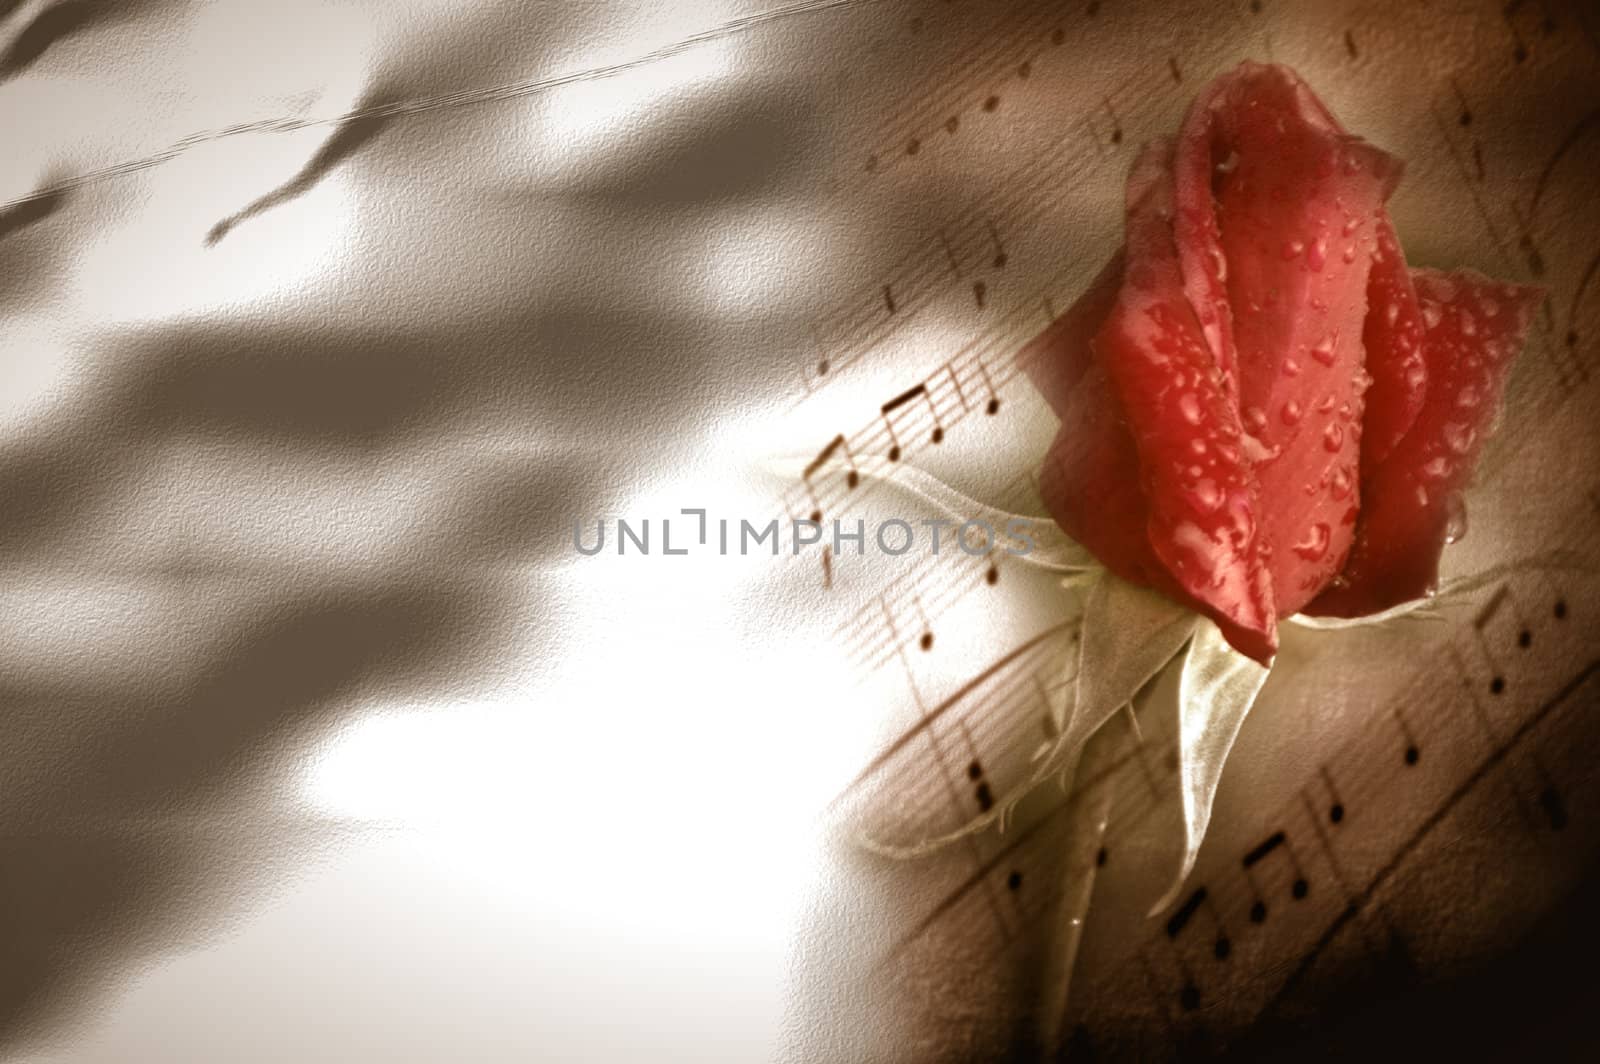 background musical score and red rosebud on crumpled paper 